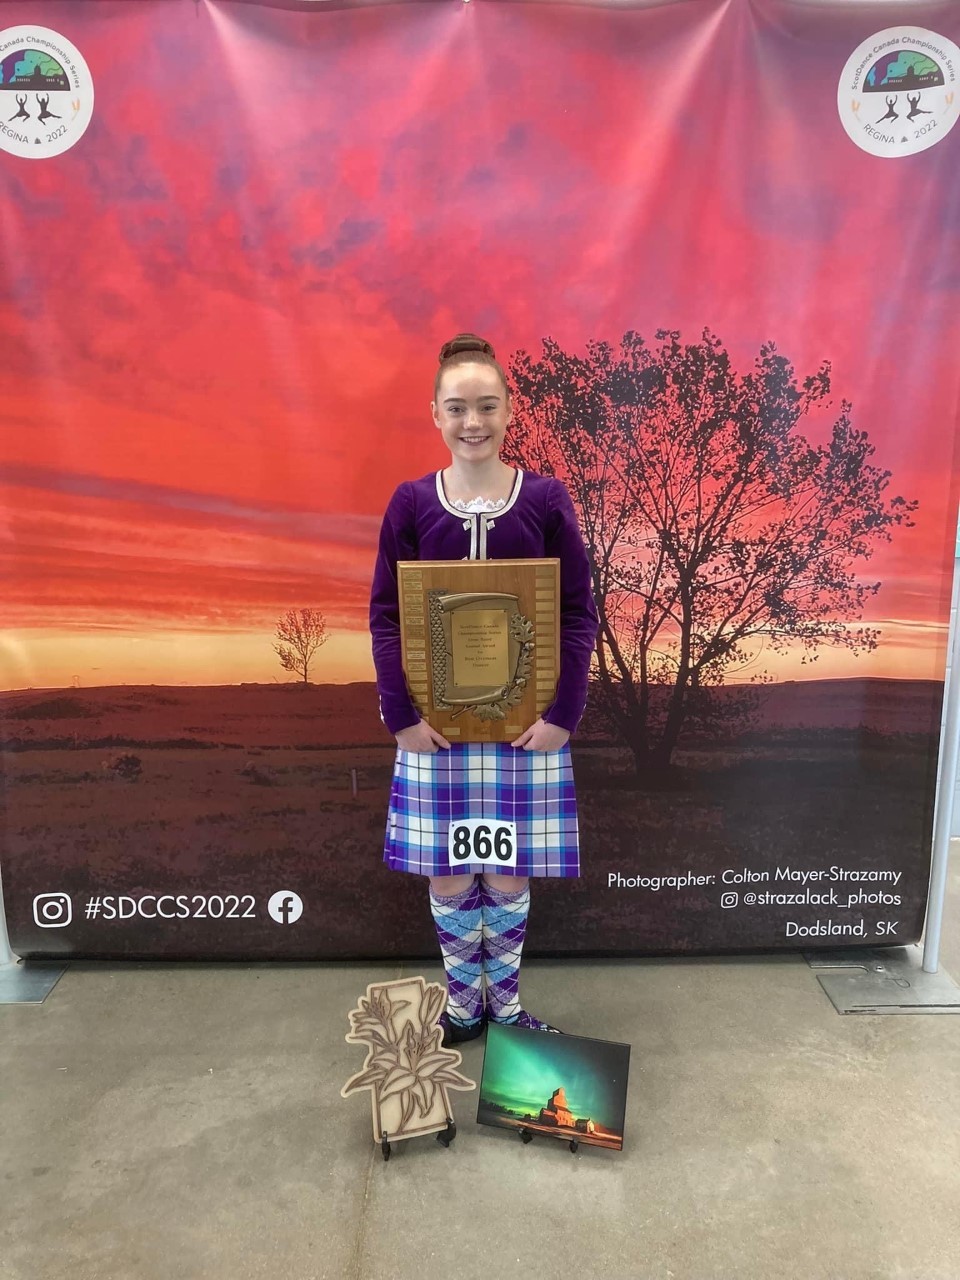 Eilidh Gammons led the way for the Helensburgh contingent with a prize haul that included the trophy for the best overseas dancer